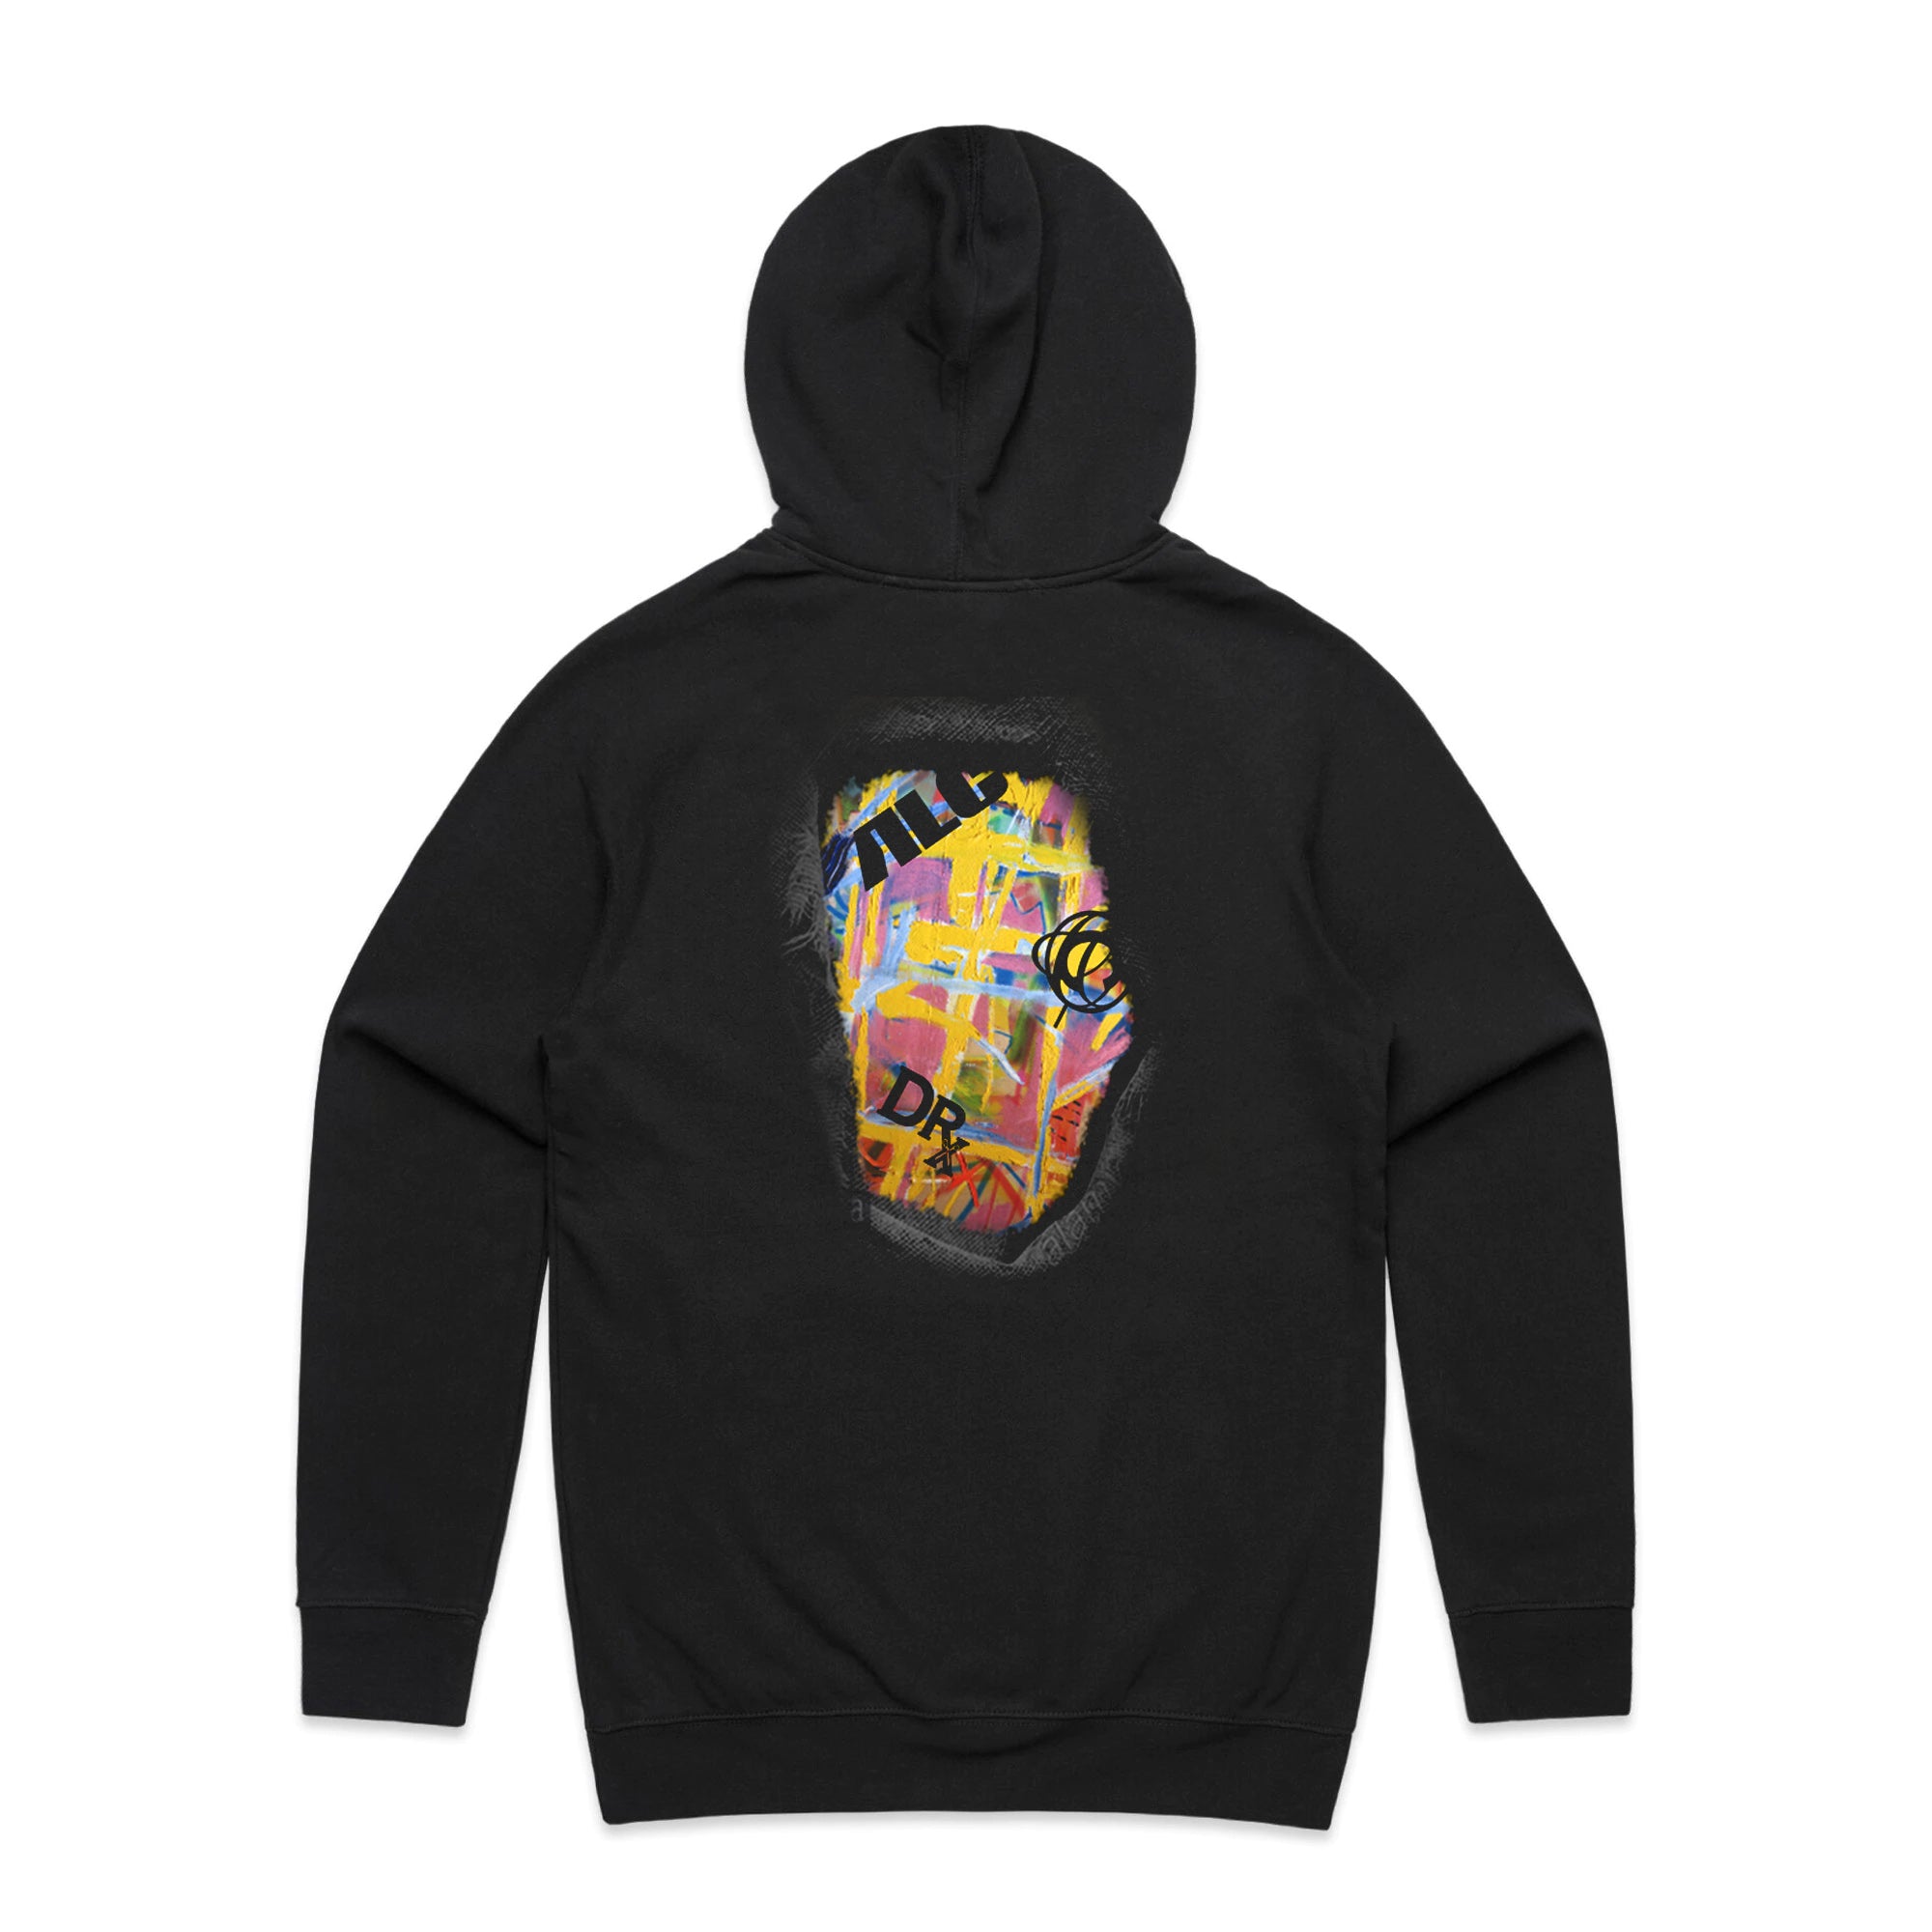 A Doctor, A Painter And An Alchemist Walk Into A Bar (Black Hoodie ...